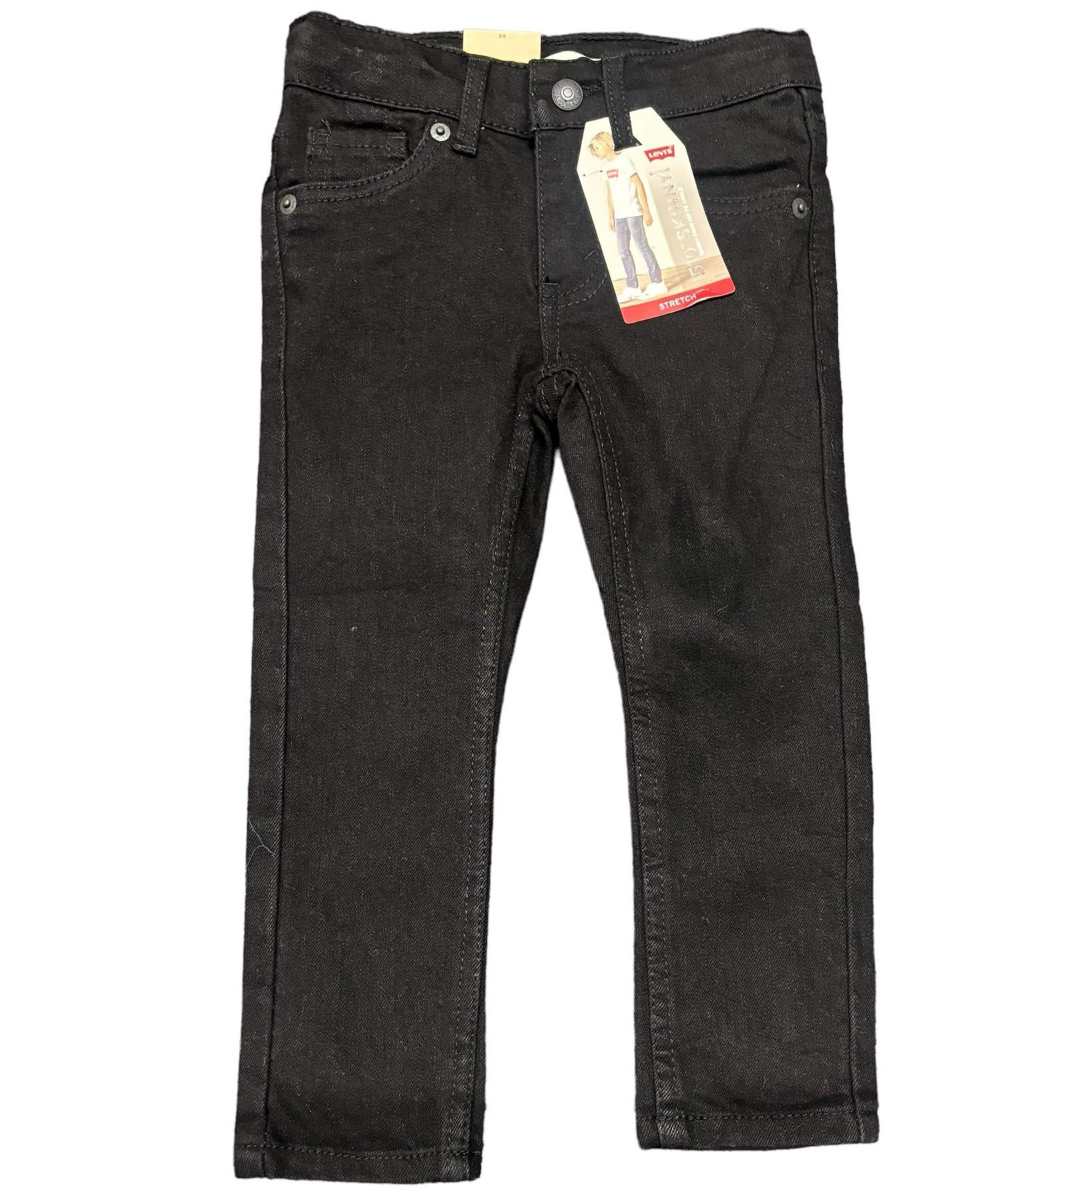 LEVIS 510 SKINNY FIT JEANS 2008